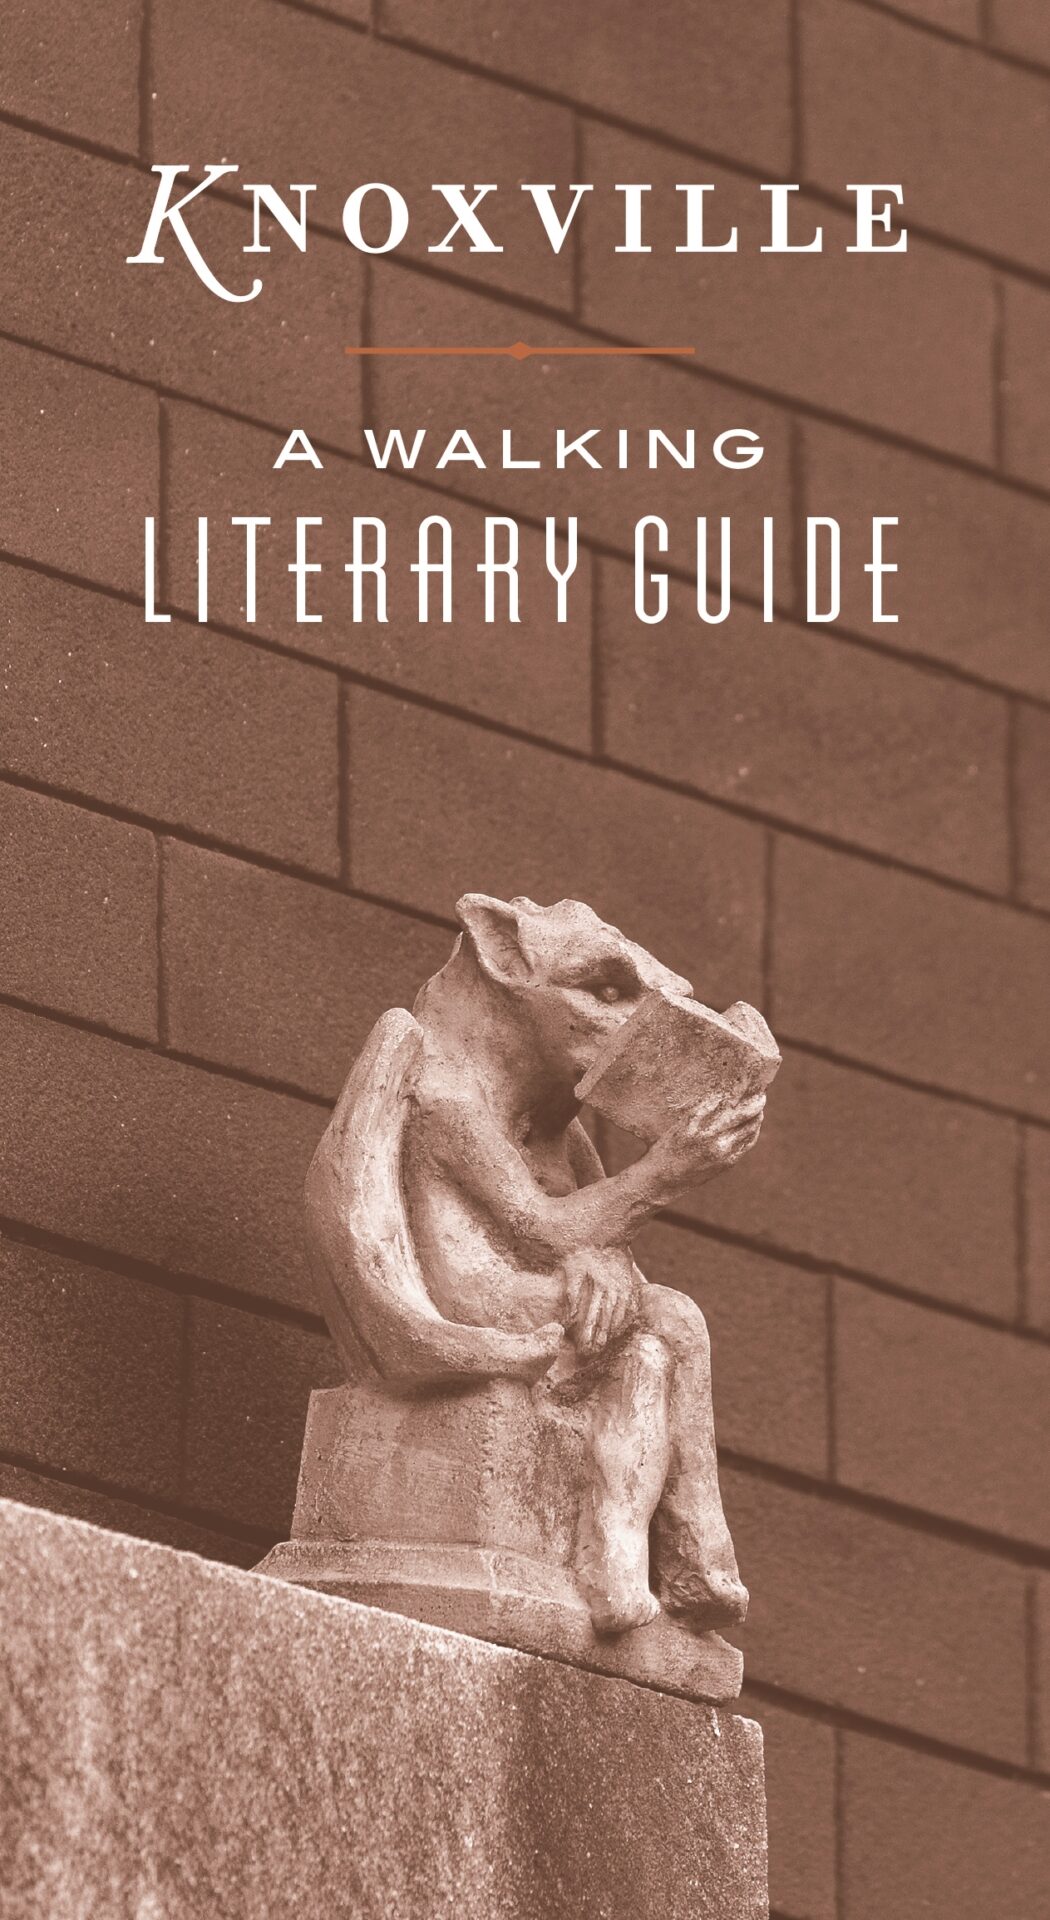 Knoxville: A Walking Literary Guide cover image with photo of a gargoyle reading